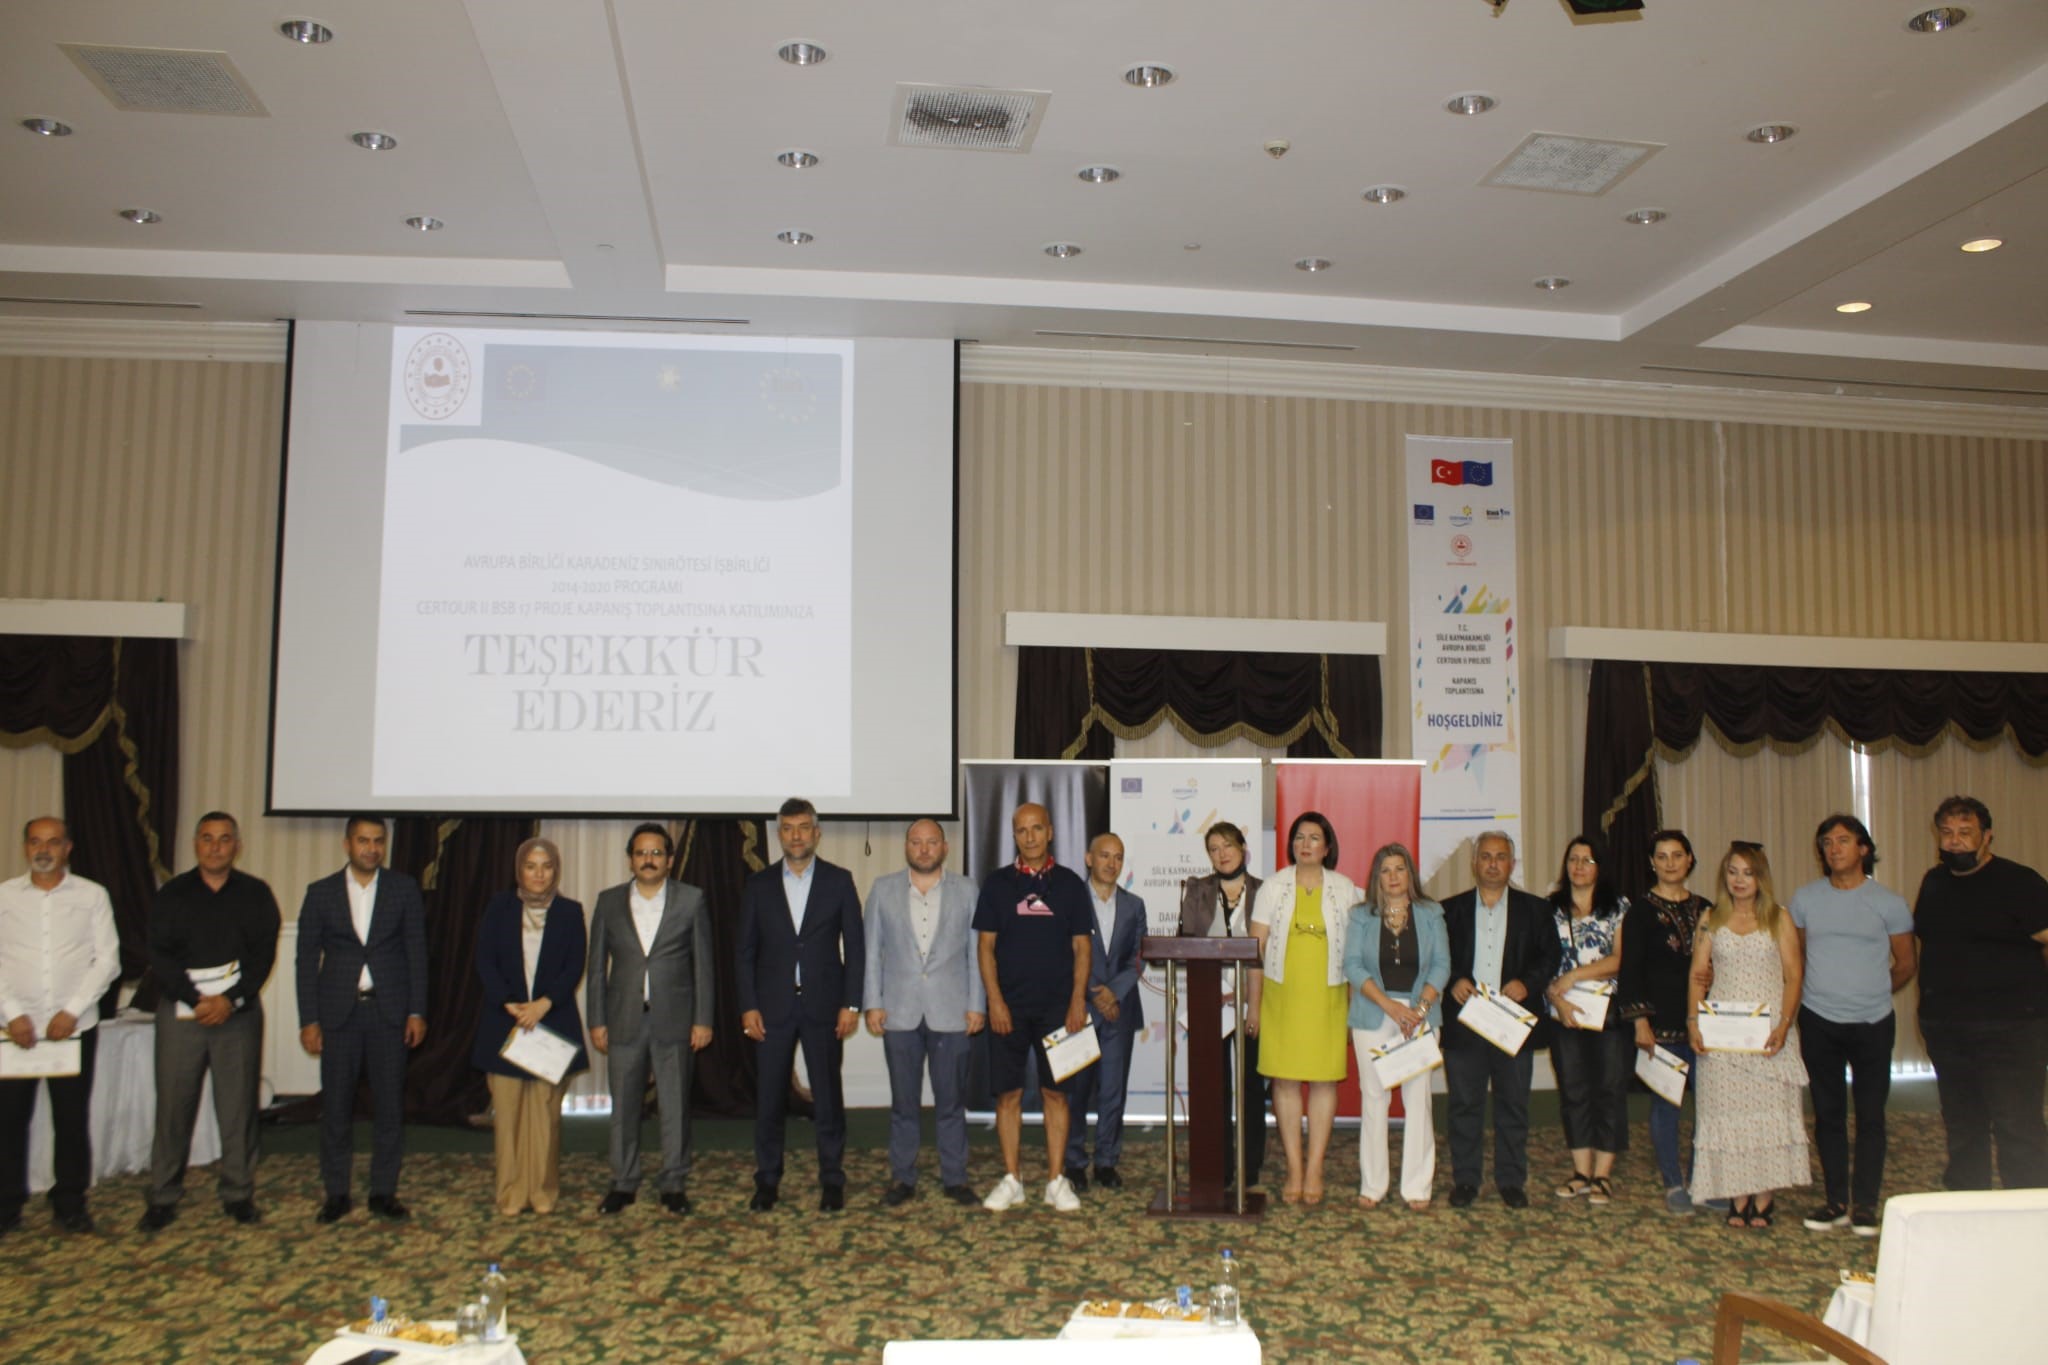 The closing event for the project “CERTOUR II: For A Better SME Management” was held